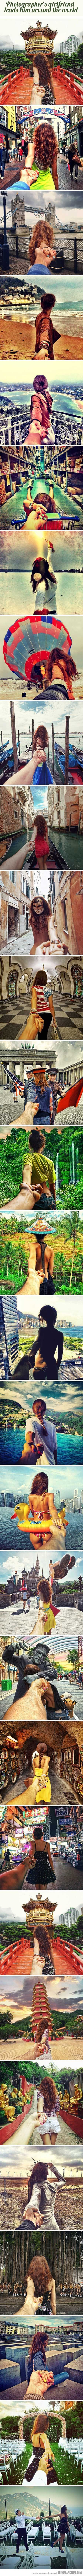 Aw! I want someone to travel the world with me like that :)